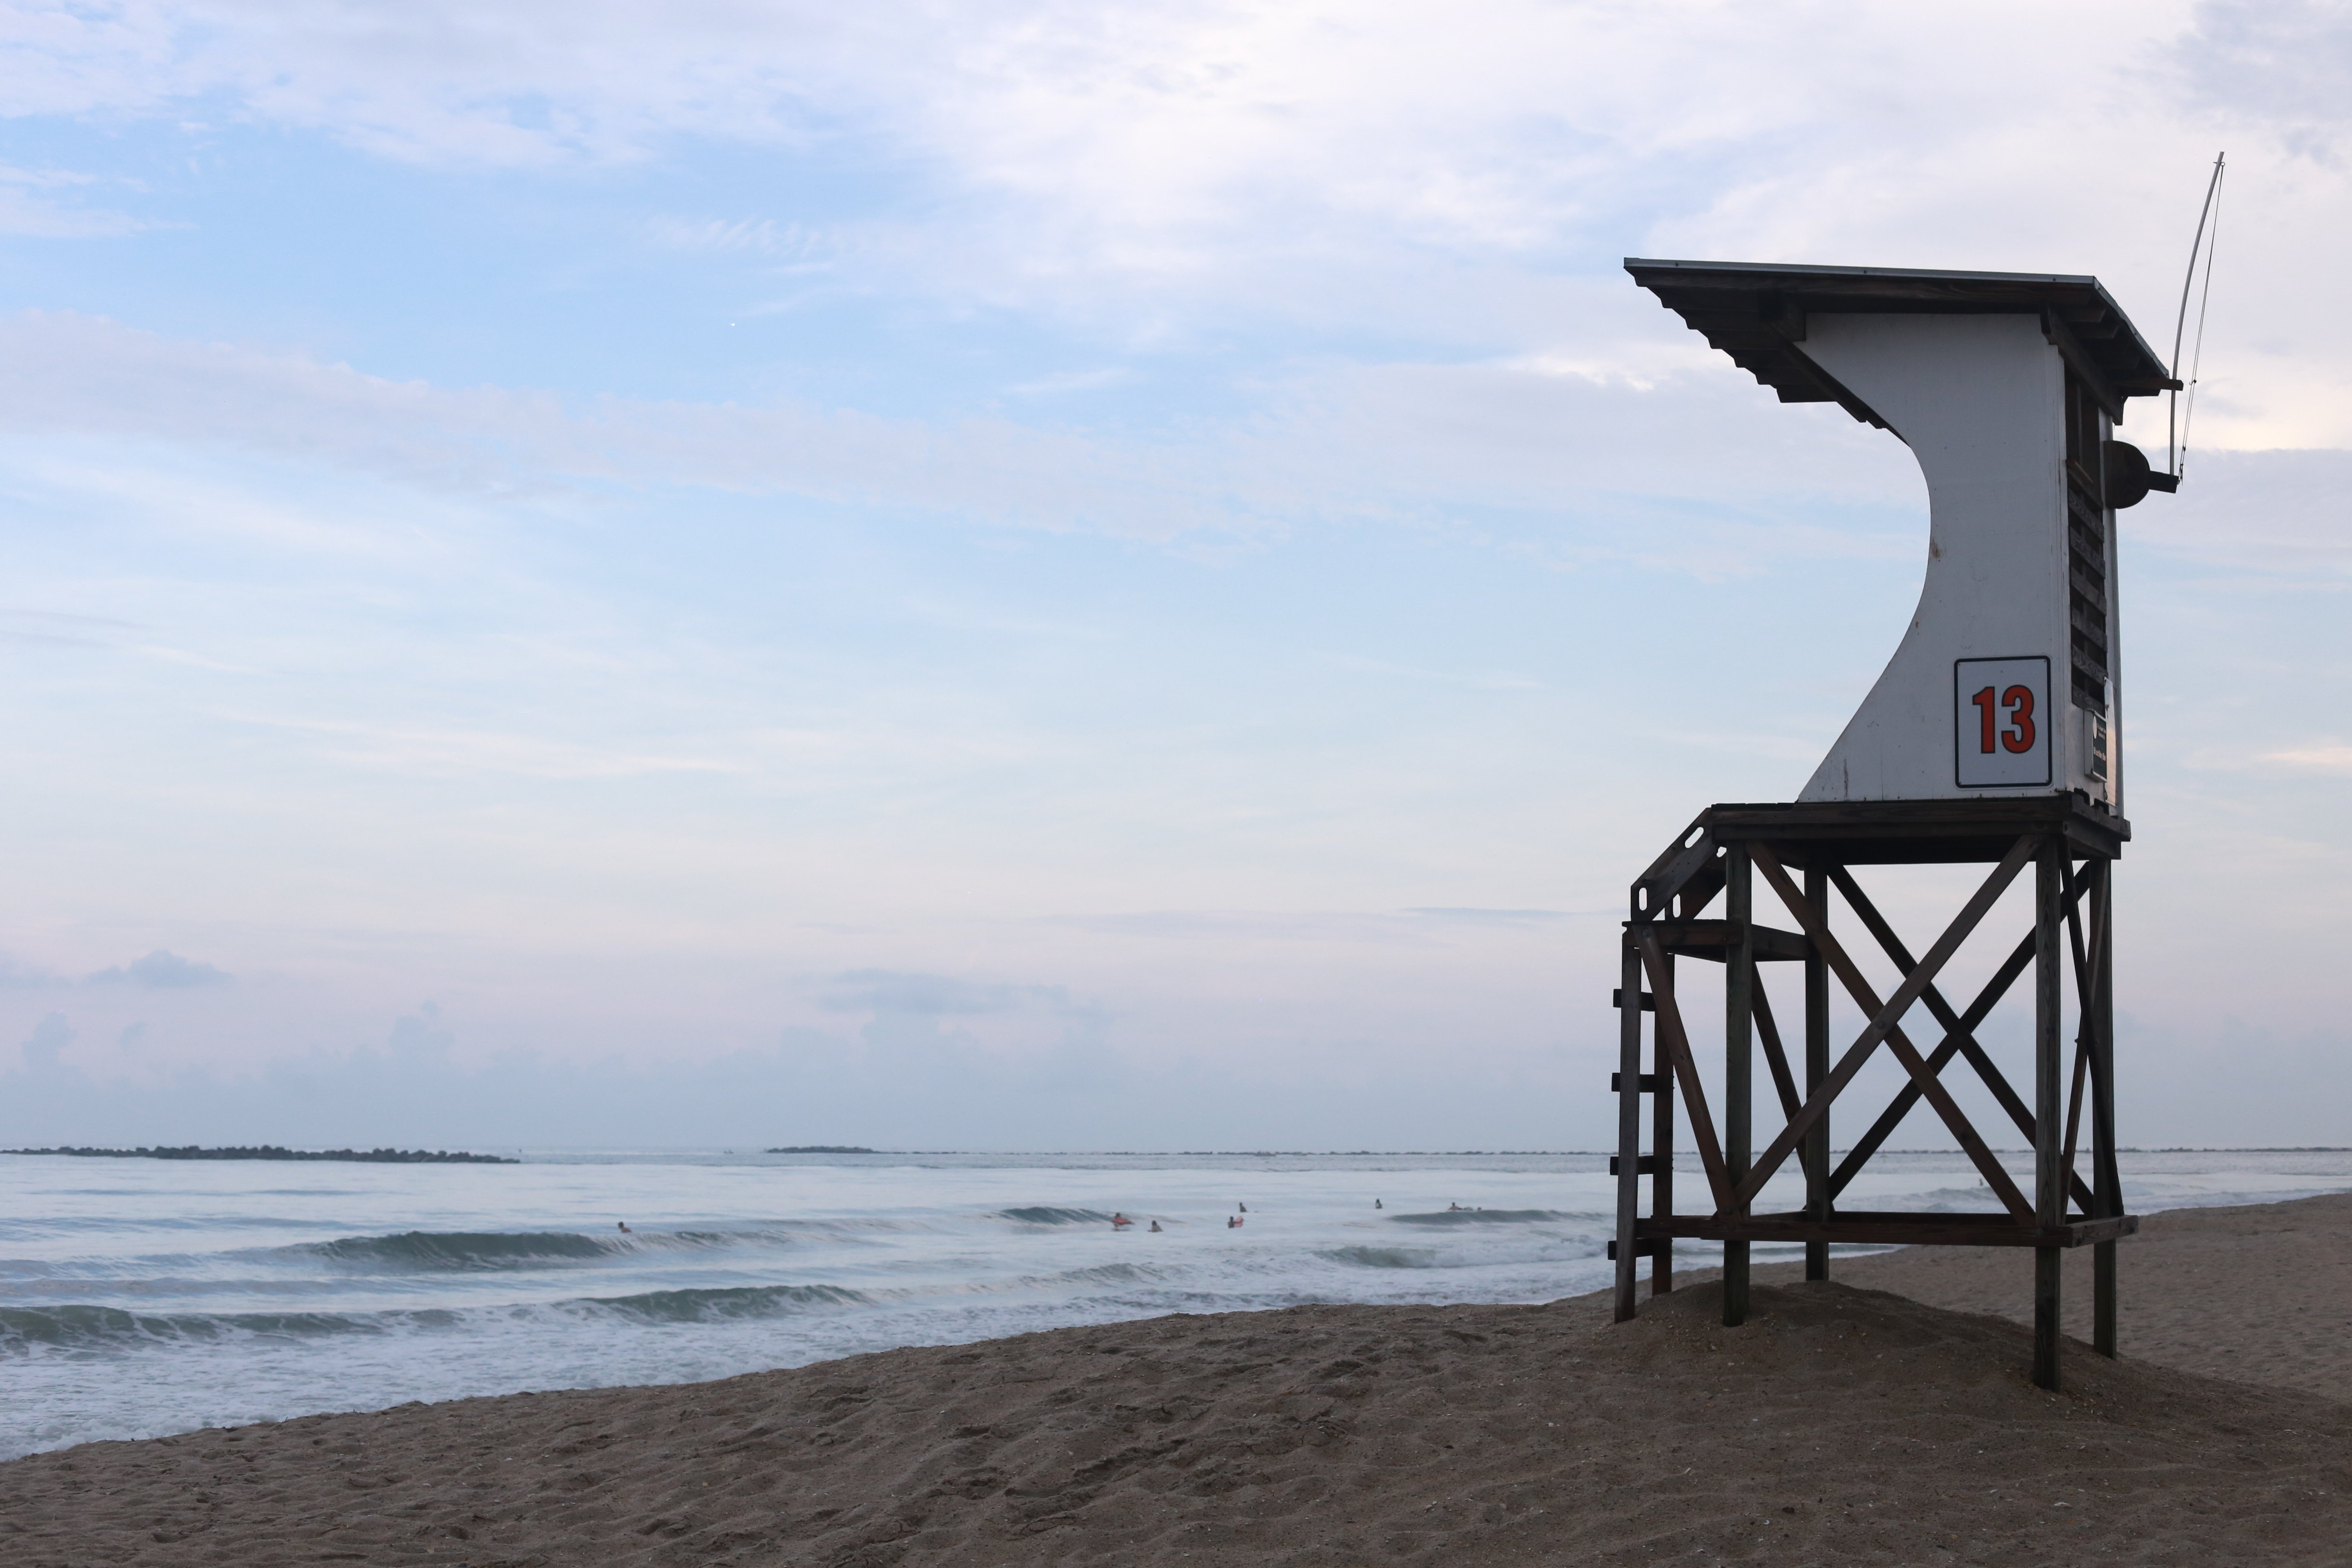 A view of the beach from below lifeguard tower 13